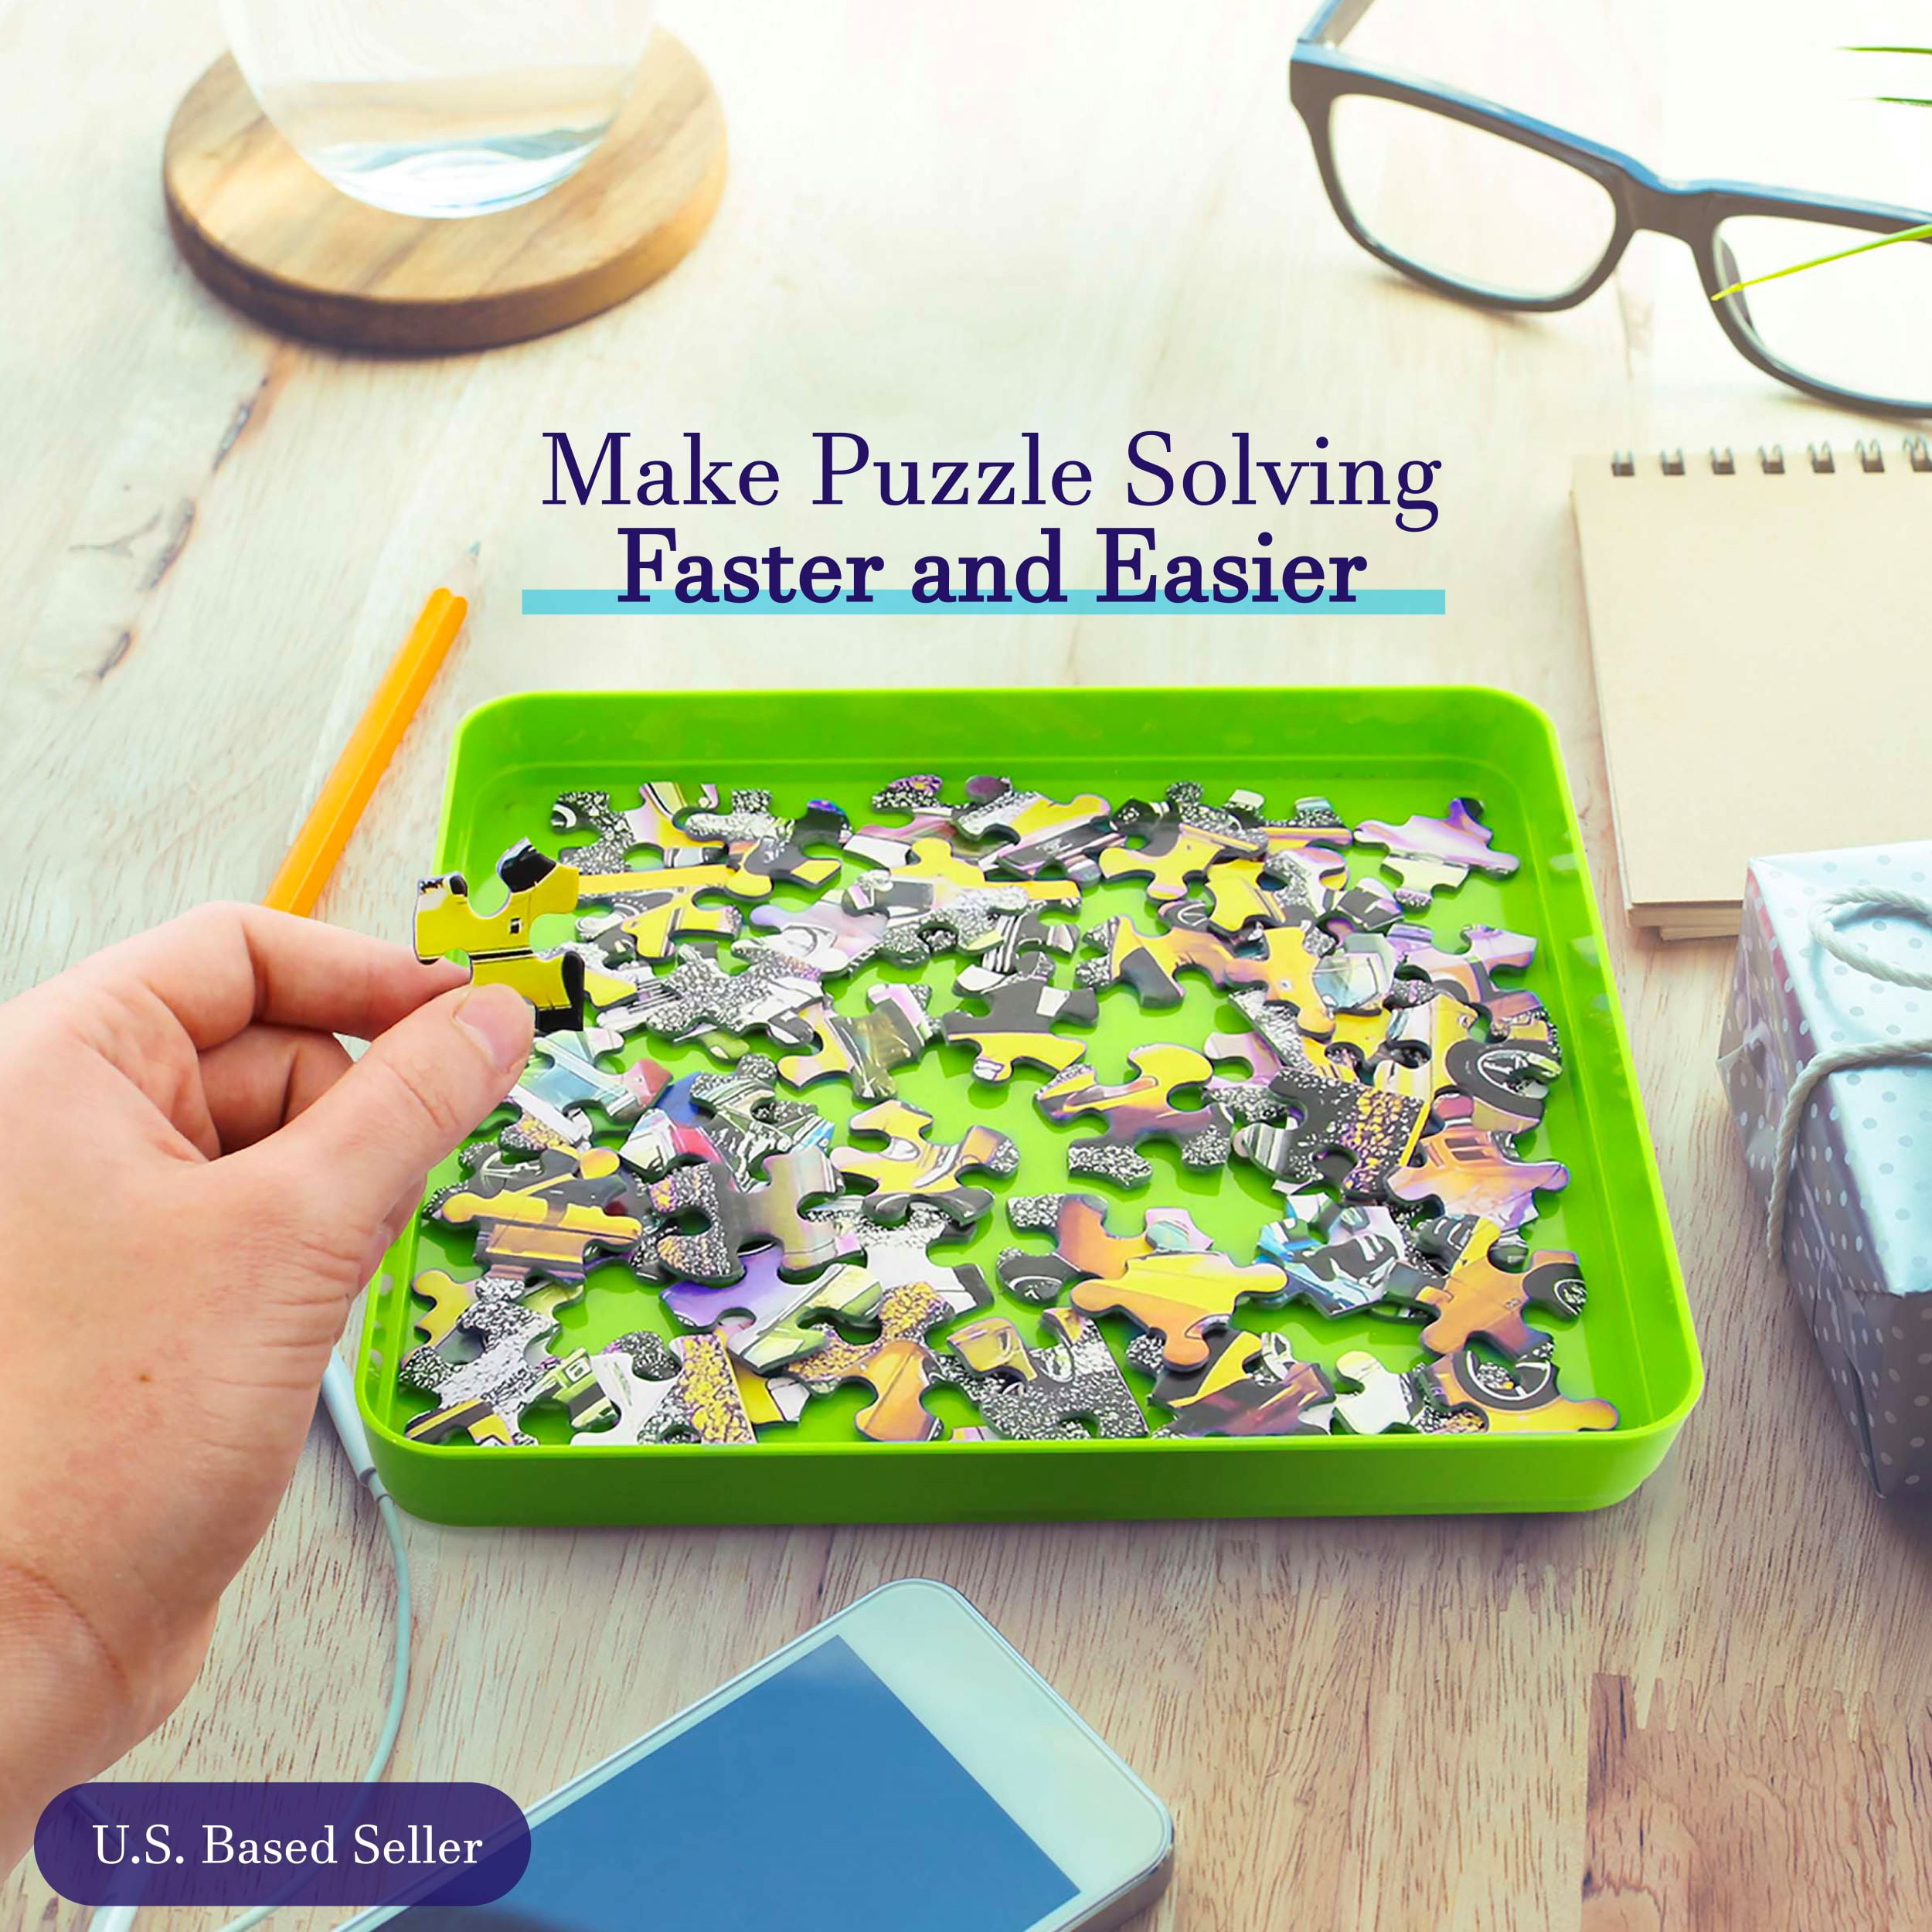 Puzzle hack. I've been wanting those puzzle tray sorters I've been